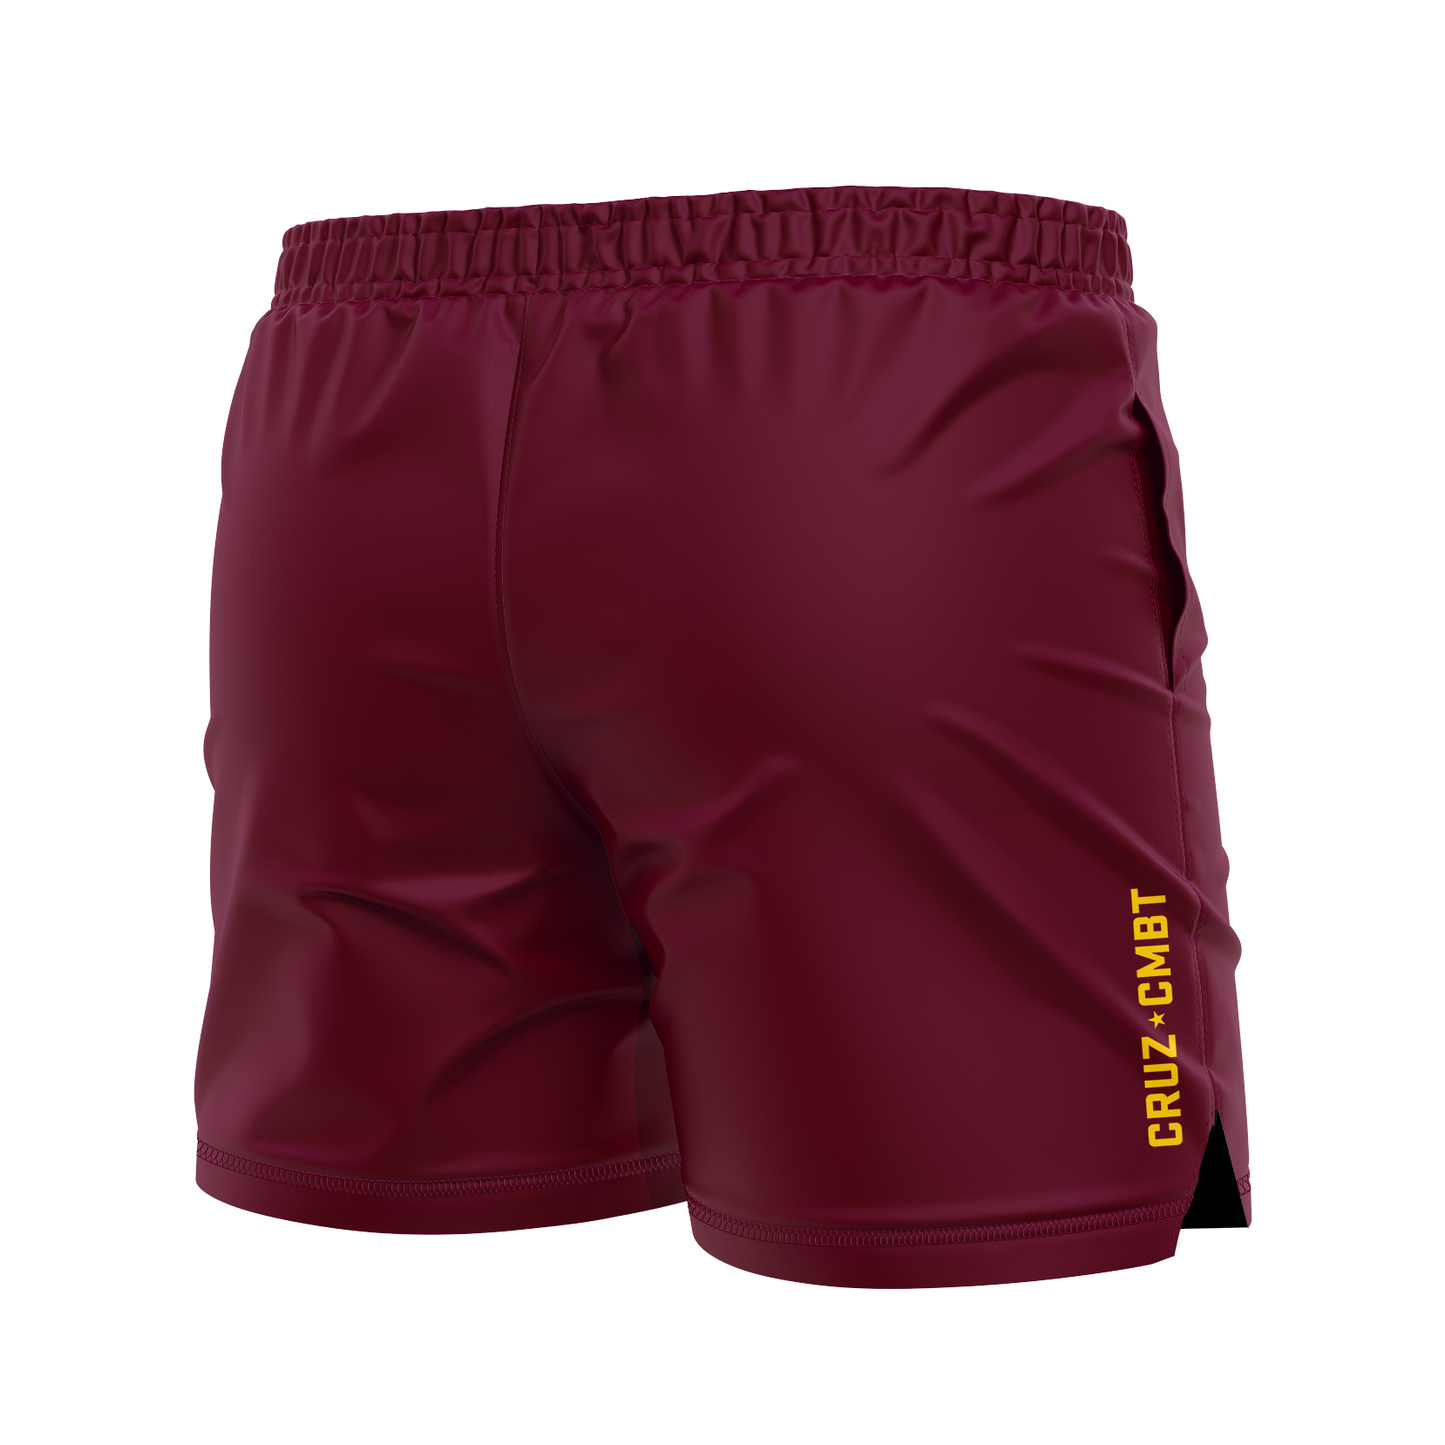 Base Collection men's FC shorts, maroon and athl. gold